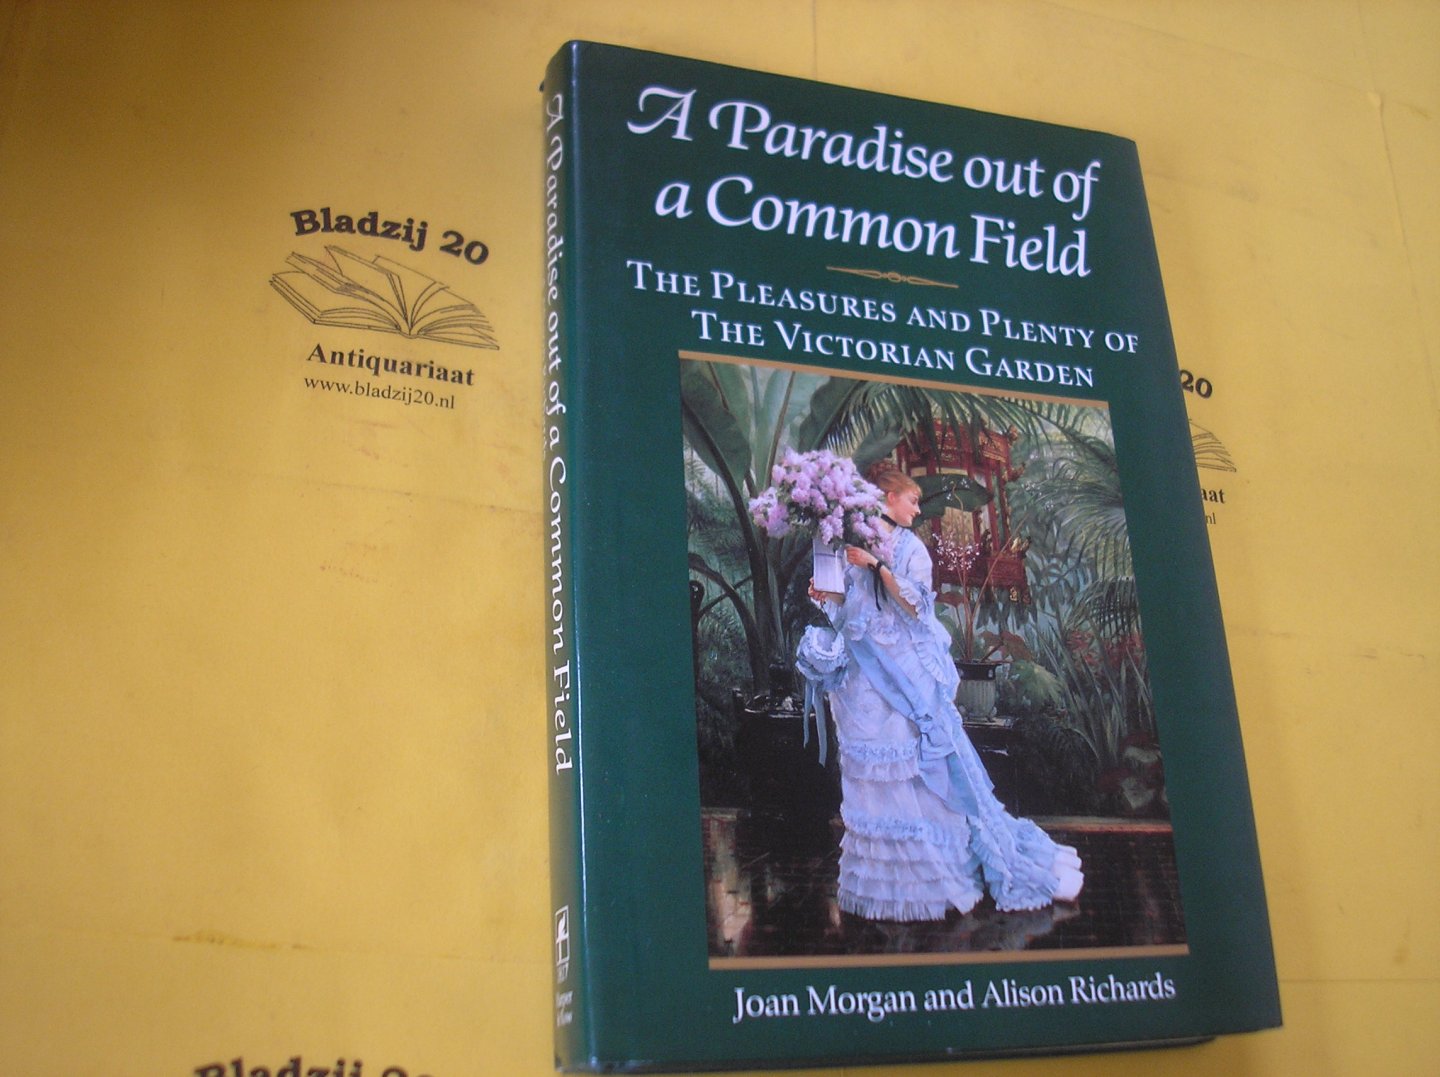 Morgan, Joan and Richards, Alison. - A paradise out of a common field. The pleasures and plenty of the Victorian garden.